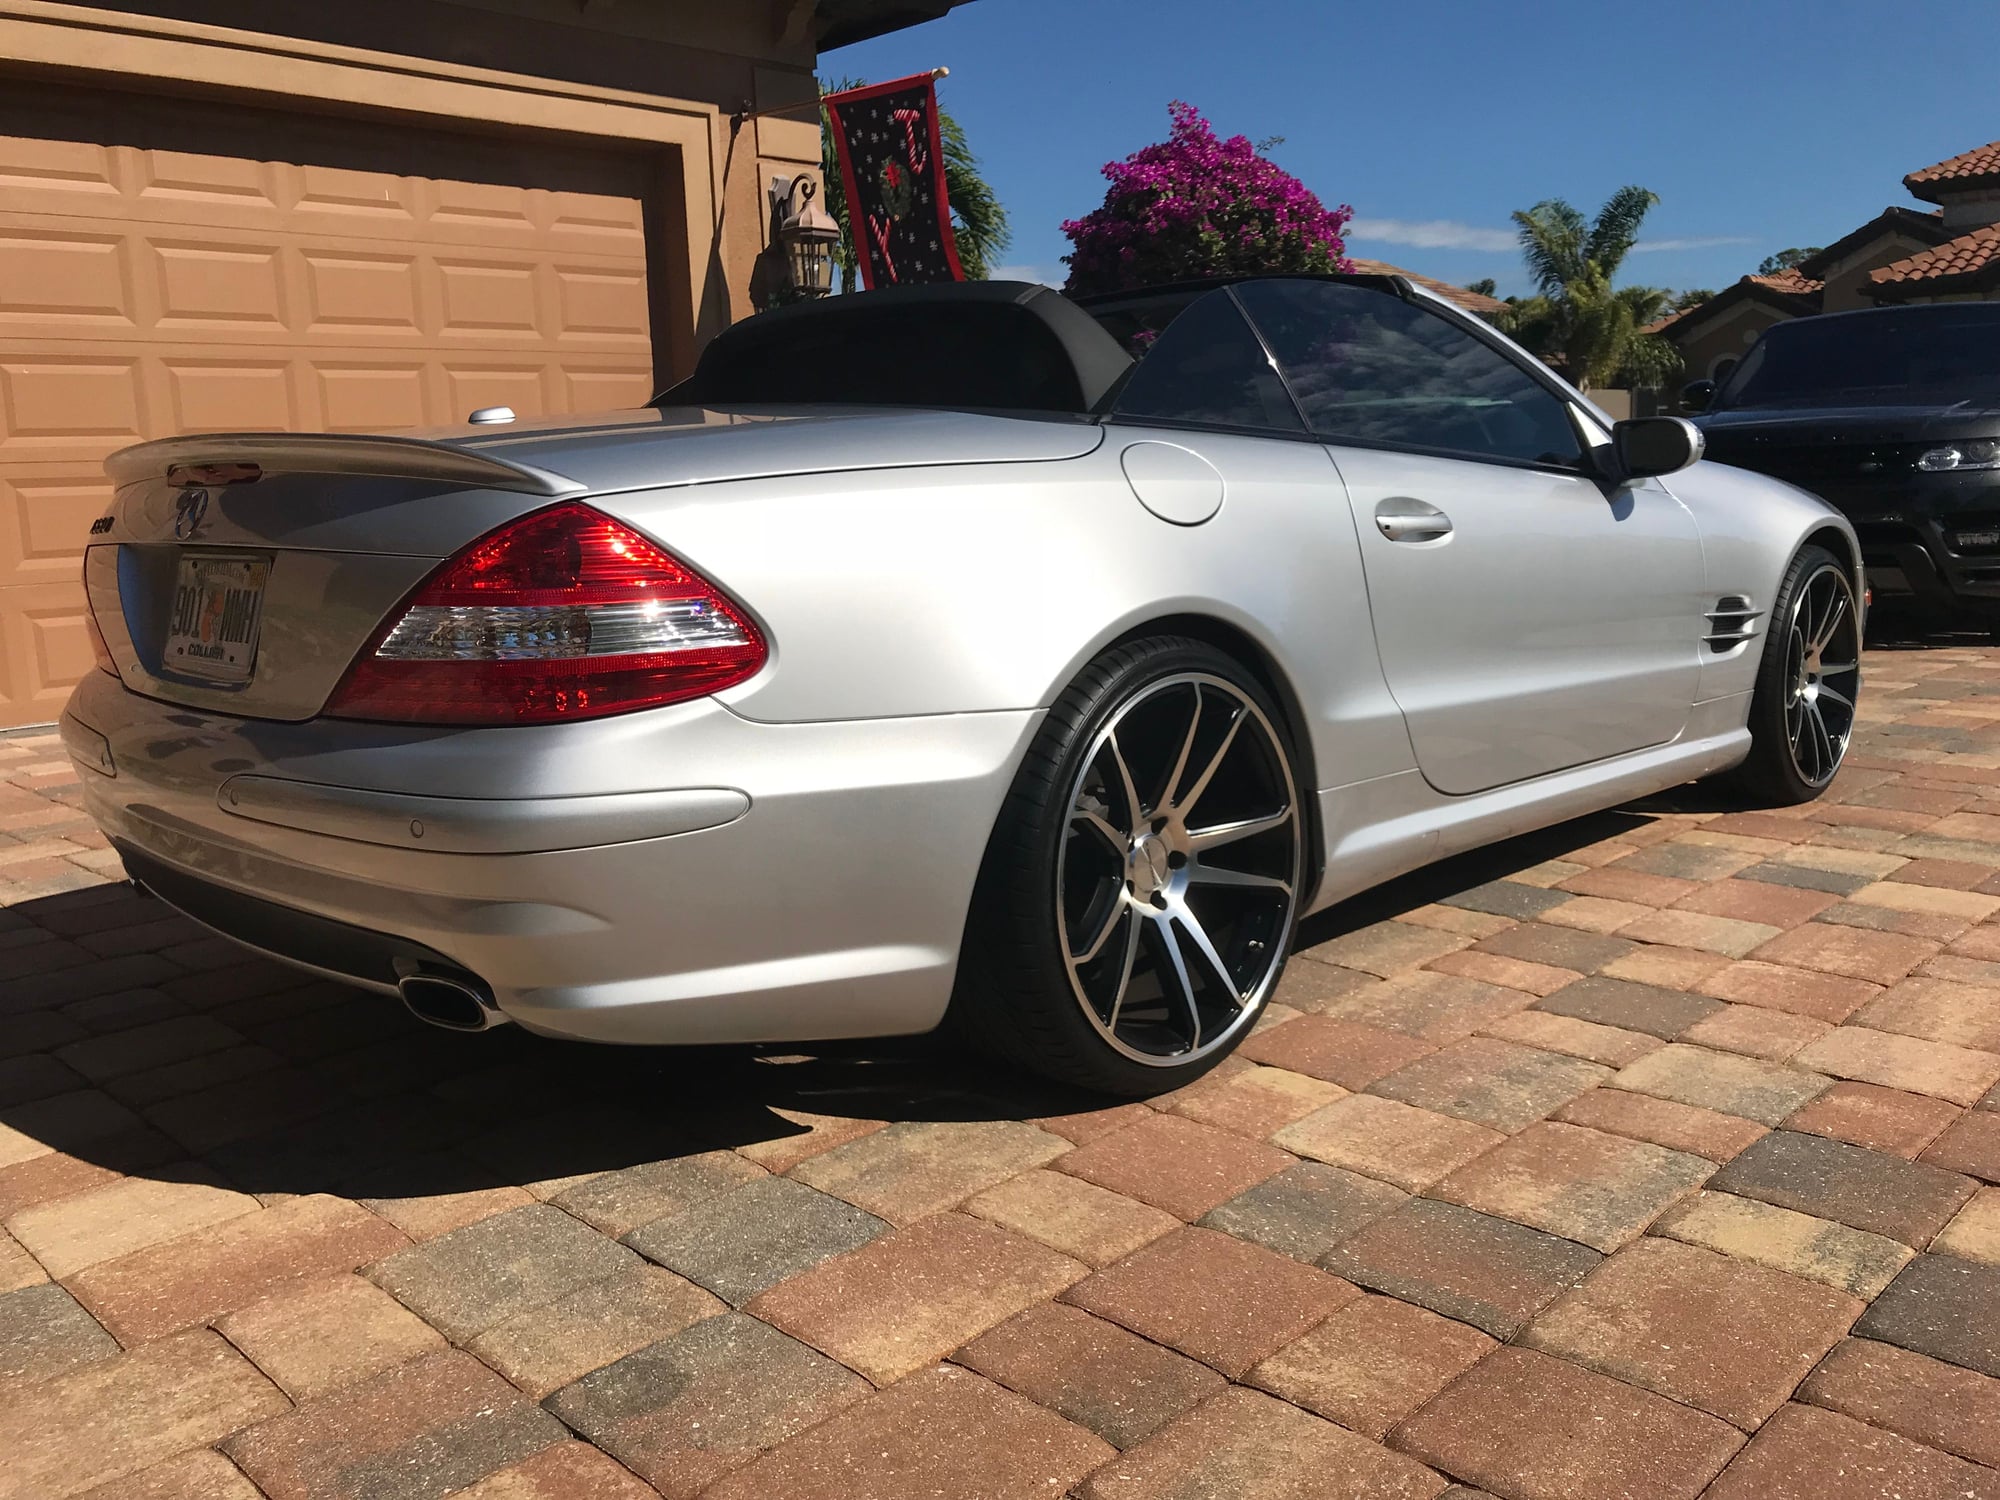 2007 Mercedes-Benz SL550 - 2007 - SL550 - AMG package - 45K Miles - Florida - Very Clean - Excellent Condition - Used - VIN WDBSK71F57F119151 - 45,500 Miles - 2WD - Automatic - Convertible - Silver - Naples, FL 34119, United States